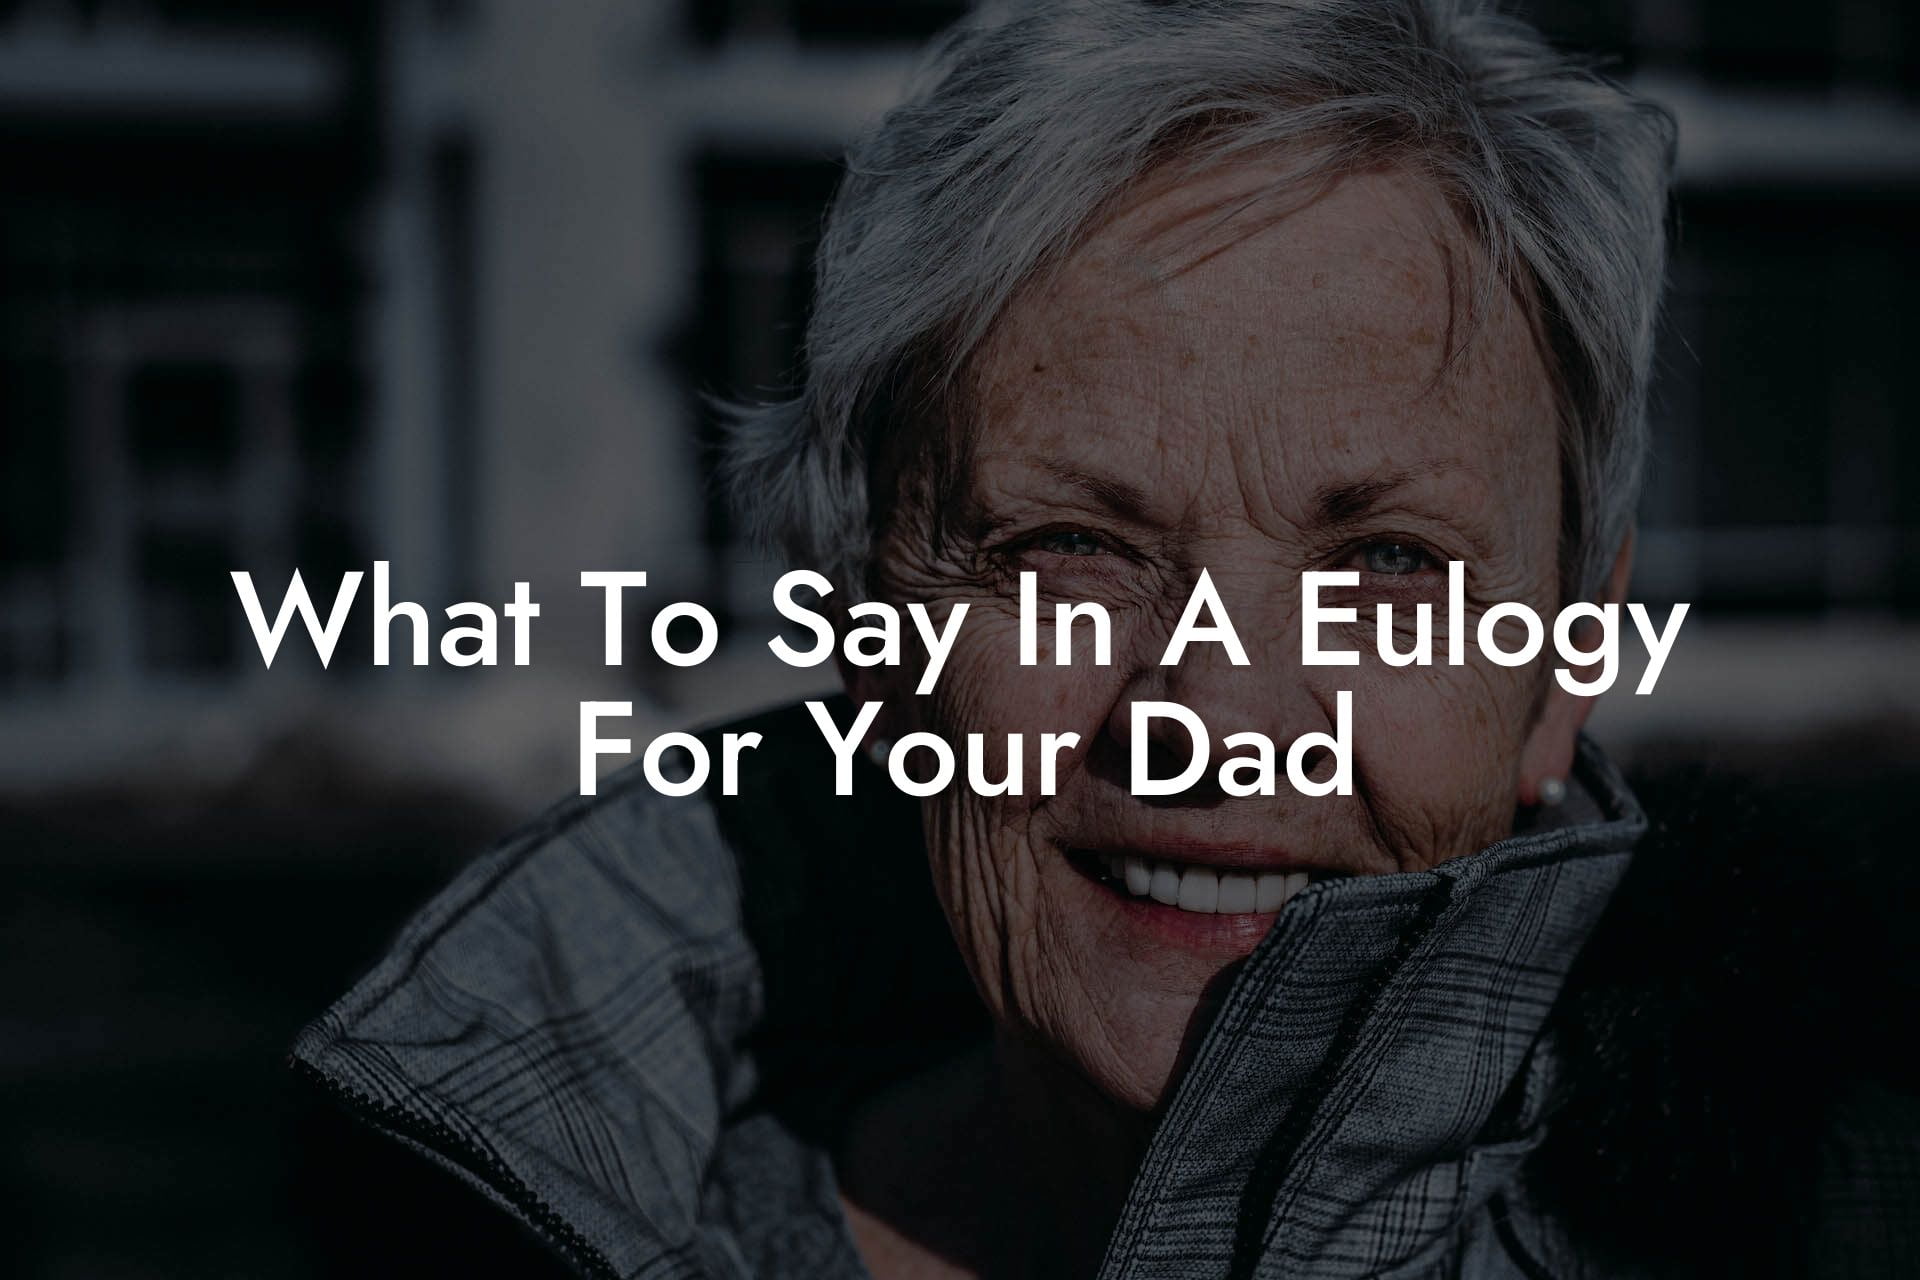 What To Say In A Eulogy For Your Dad